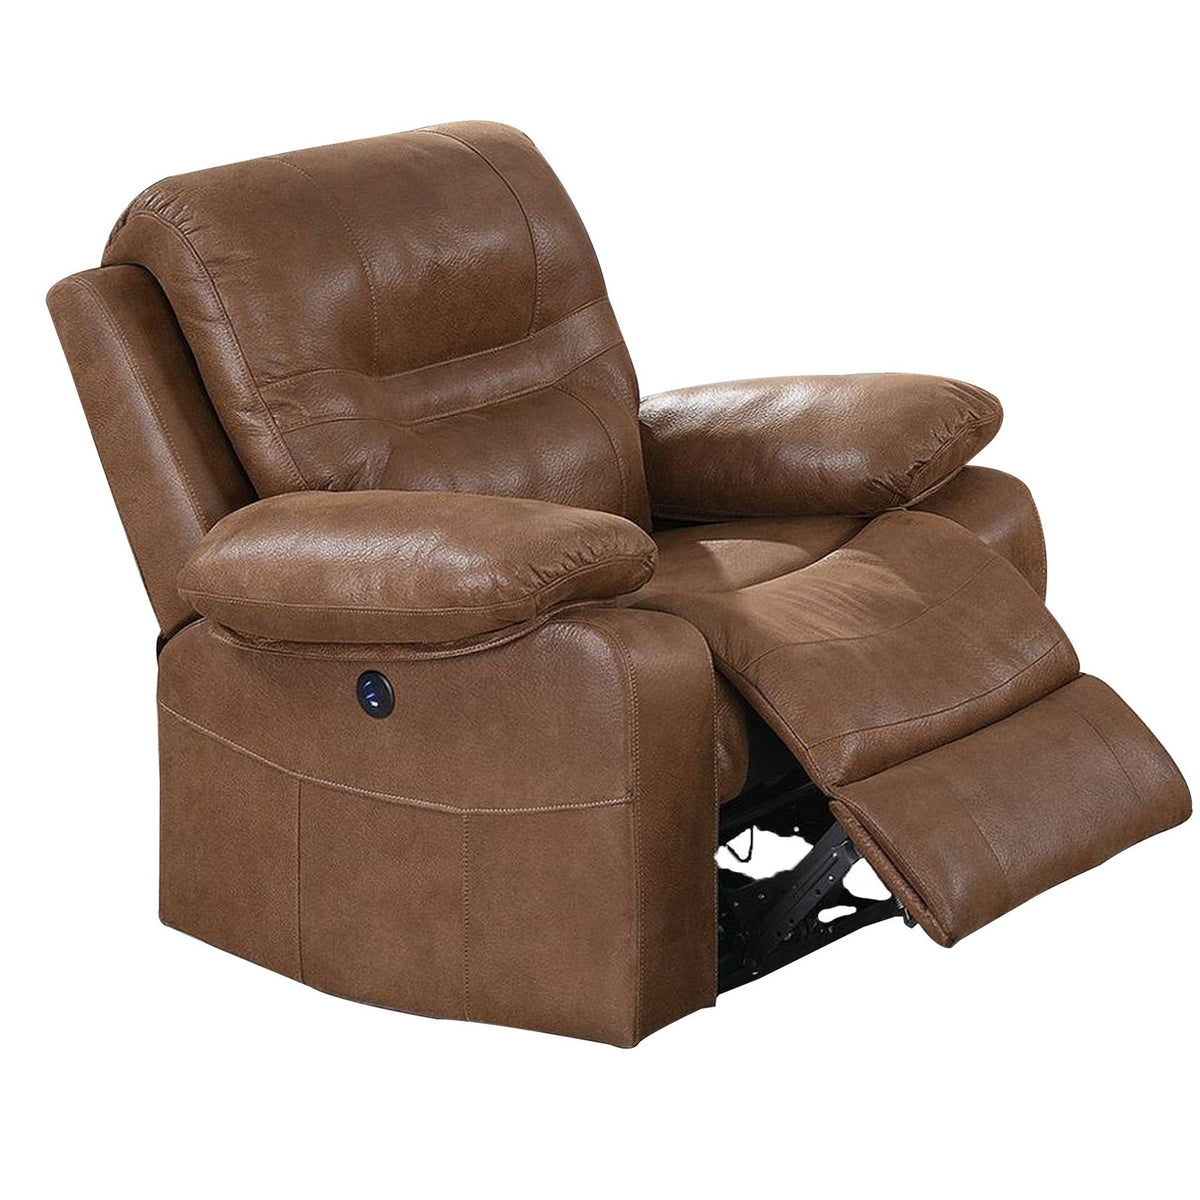 41 Inch leatherette Reclining Chair with USB Port, Brown - BM232082